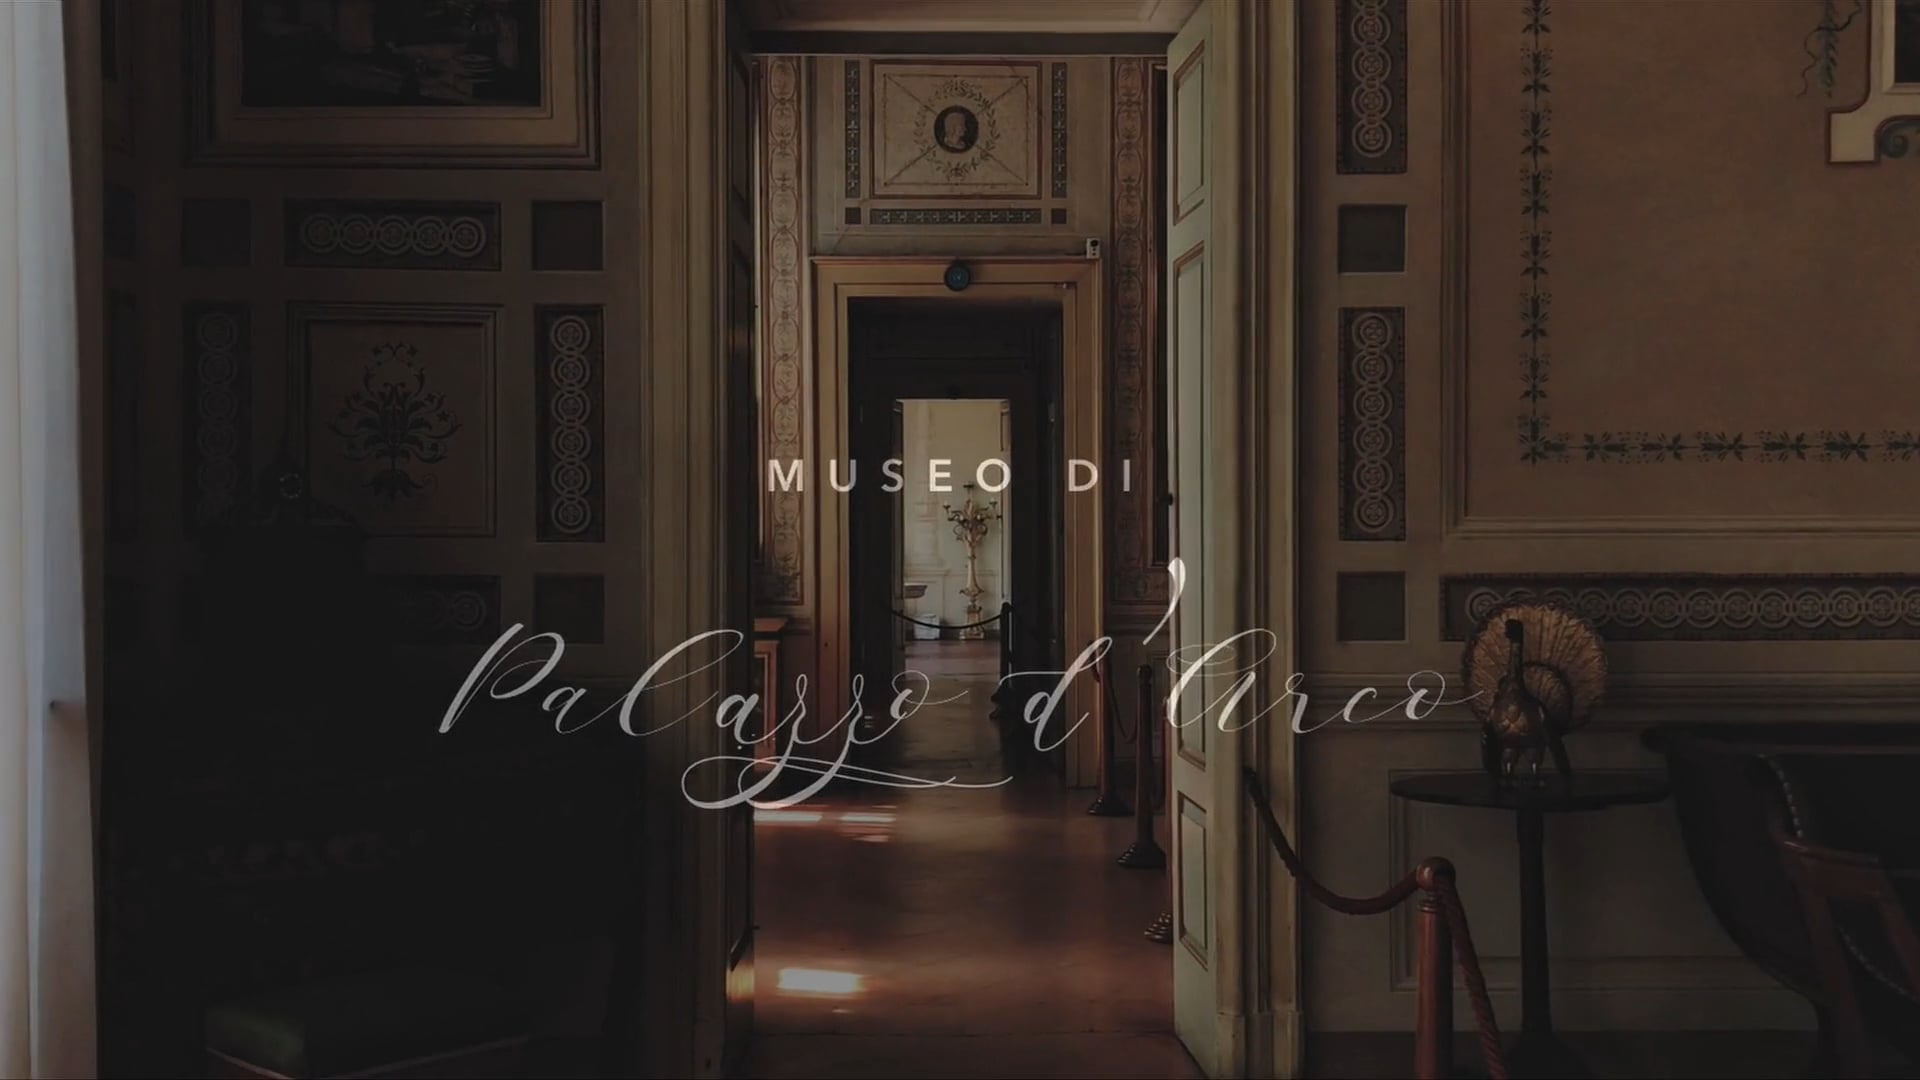 PALAZZO D'ARCO | Museum Palace Art gallery